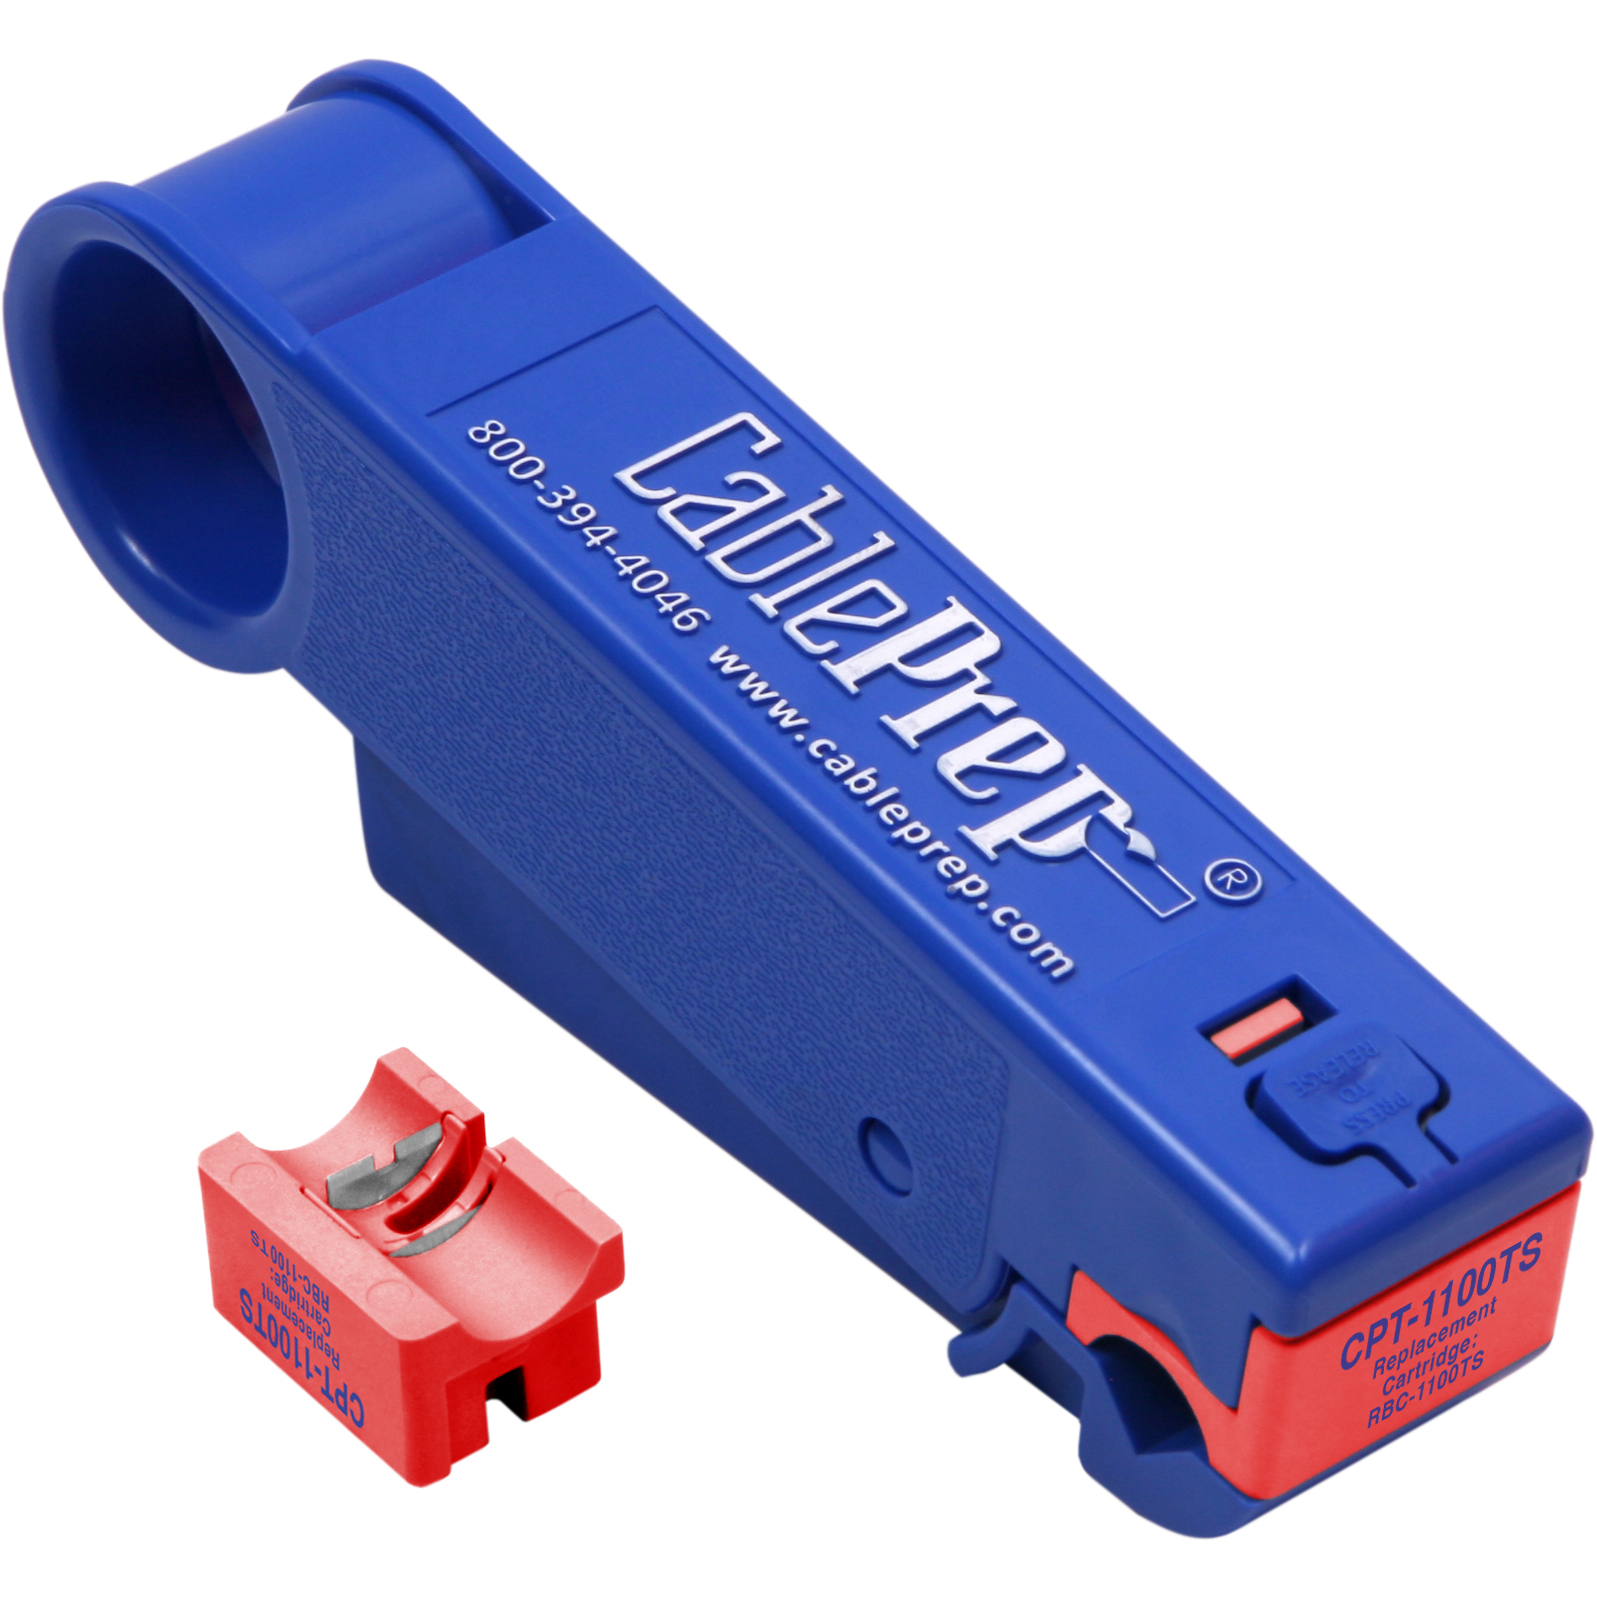 Cable Prep 7 & 11 Tri-Shield Cable Stripper With Extra Blade Cartridge from GME Supply